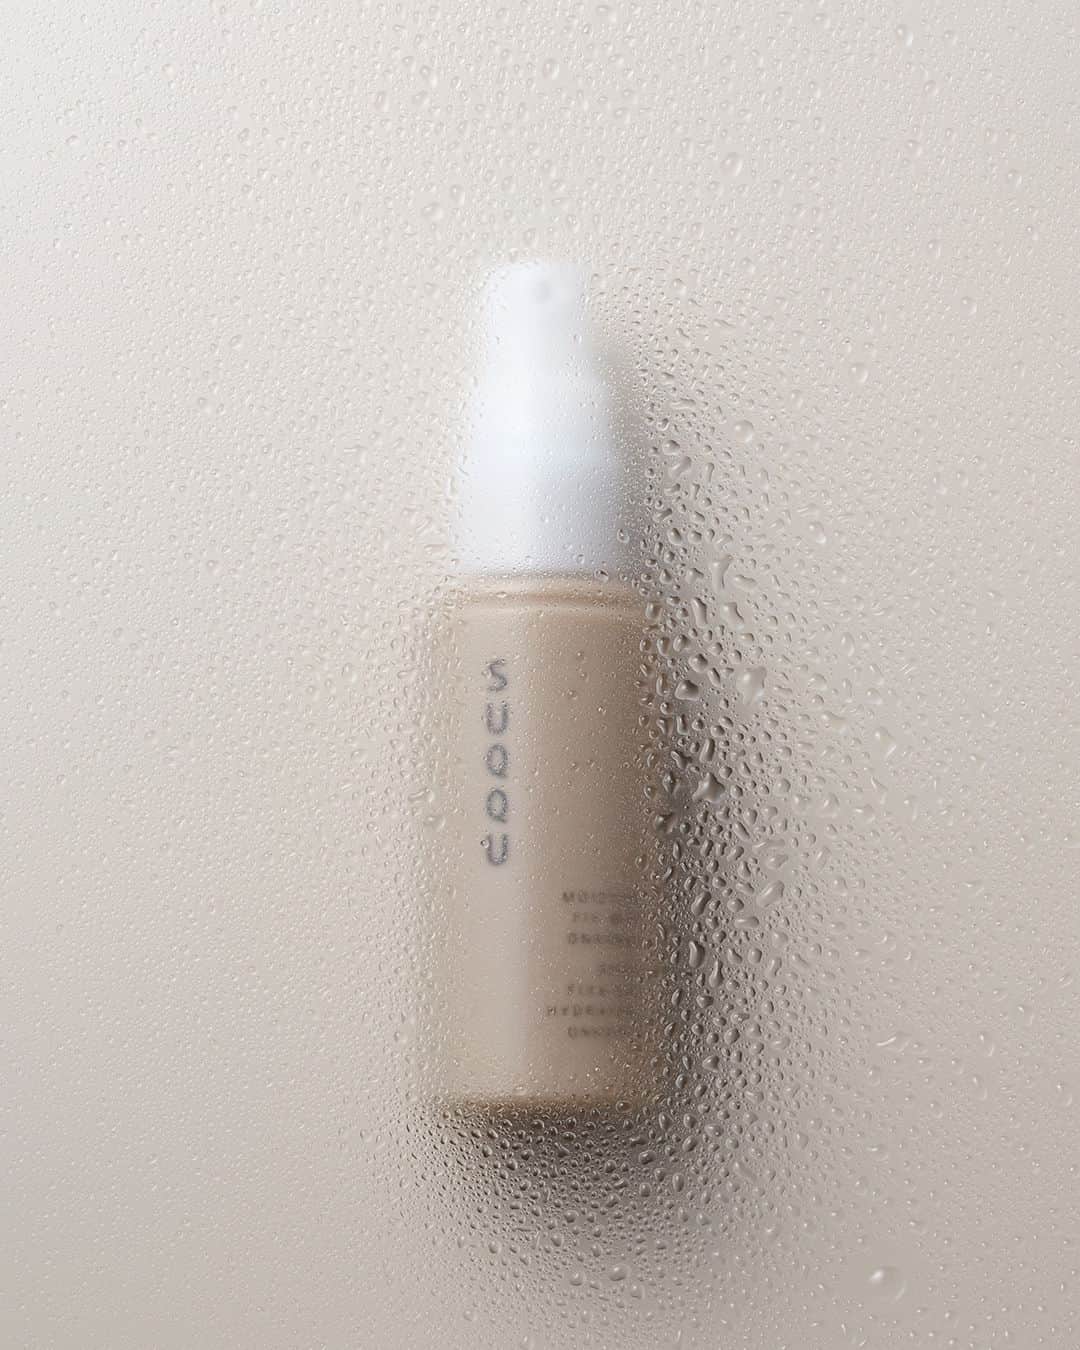 SUQQU公式Instgramアカウントのインスタグラム：「A soft mist hydrates the skin, leaving it fresh and glowing. It can also be used to finish or correct your makeup.  ＜Instructions for use＞ With closed eyes and mouth, spray 5-6 pumps 20 cm away from the face.  Moisture Fix Mist Onnokou  肌あたりの良いミストが、肌をうるおいで満たし、みずみずしく艶やかな肌へ。 日中のお直しやメイクの仕上げの艶出しに。  ＜ご使用方法＞ 顔から20cmほど離し、目・口を閉じてお顔全体に5～6プッシュほどスプレーします。  モイスチャー フィックス ミスト 穏の香  #SUQQU #スック #jbeauty #cosmetics #SUQQU20th #SUQQUskincare #モイスチャーフィックスミスト #化粧水 #Skincare #newproducts」